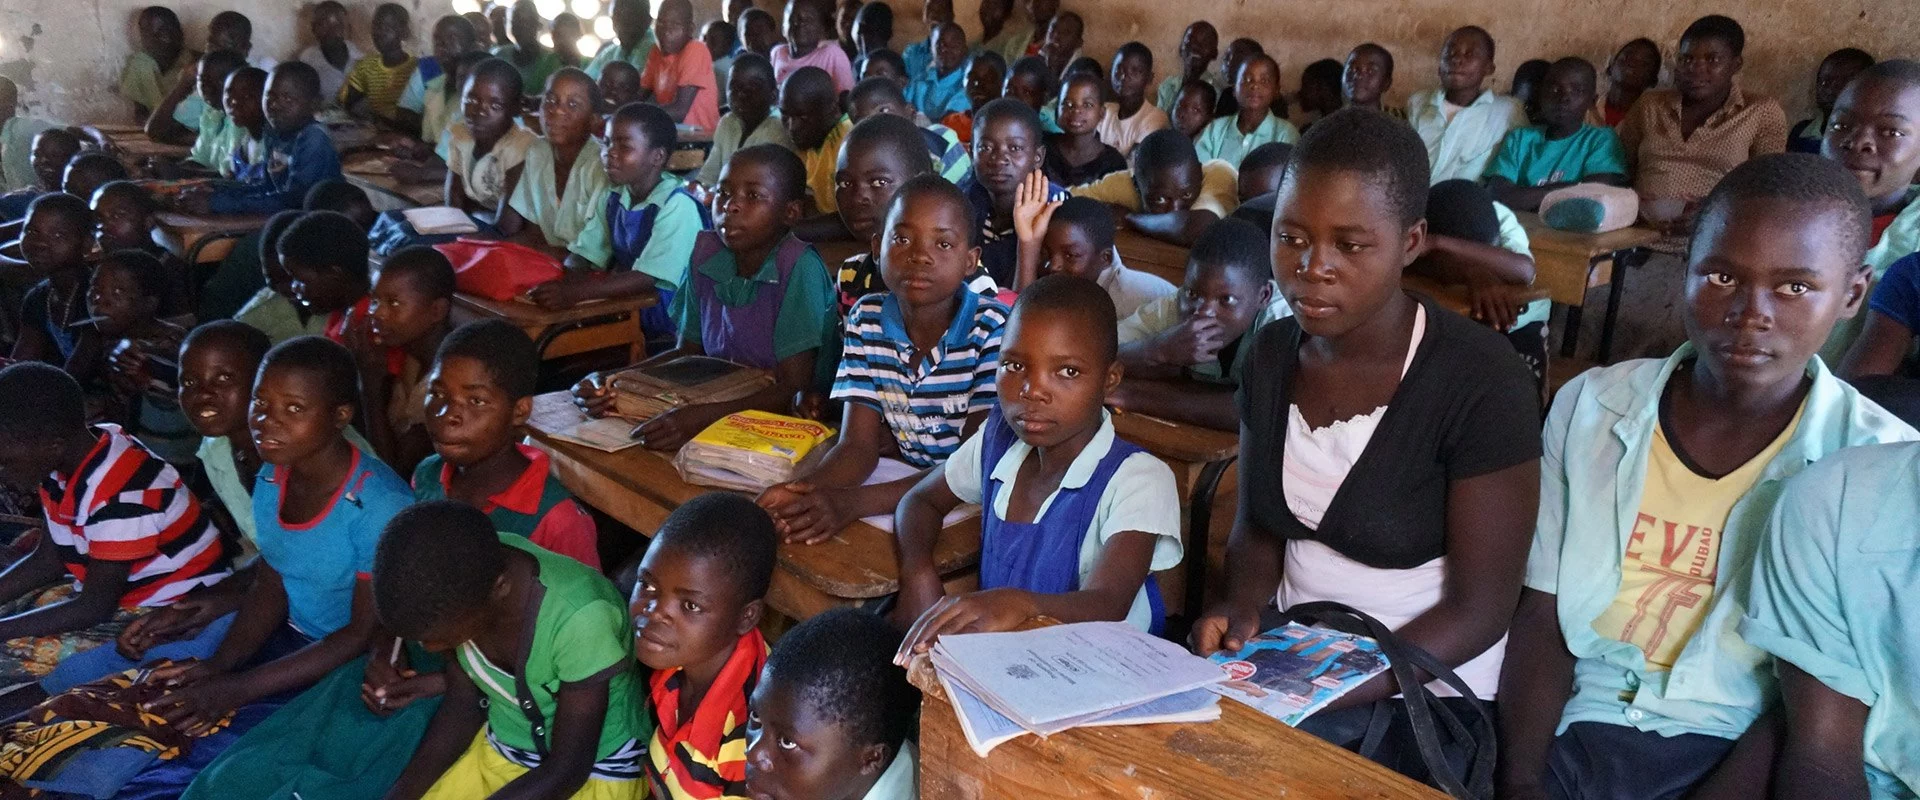 FirstTracks Sponsors a Student in Malawi